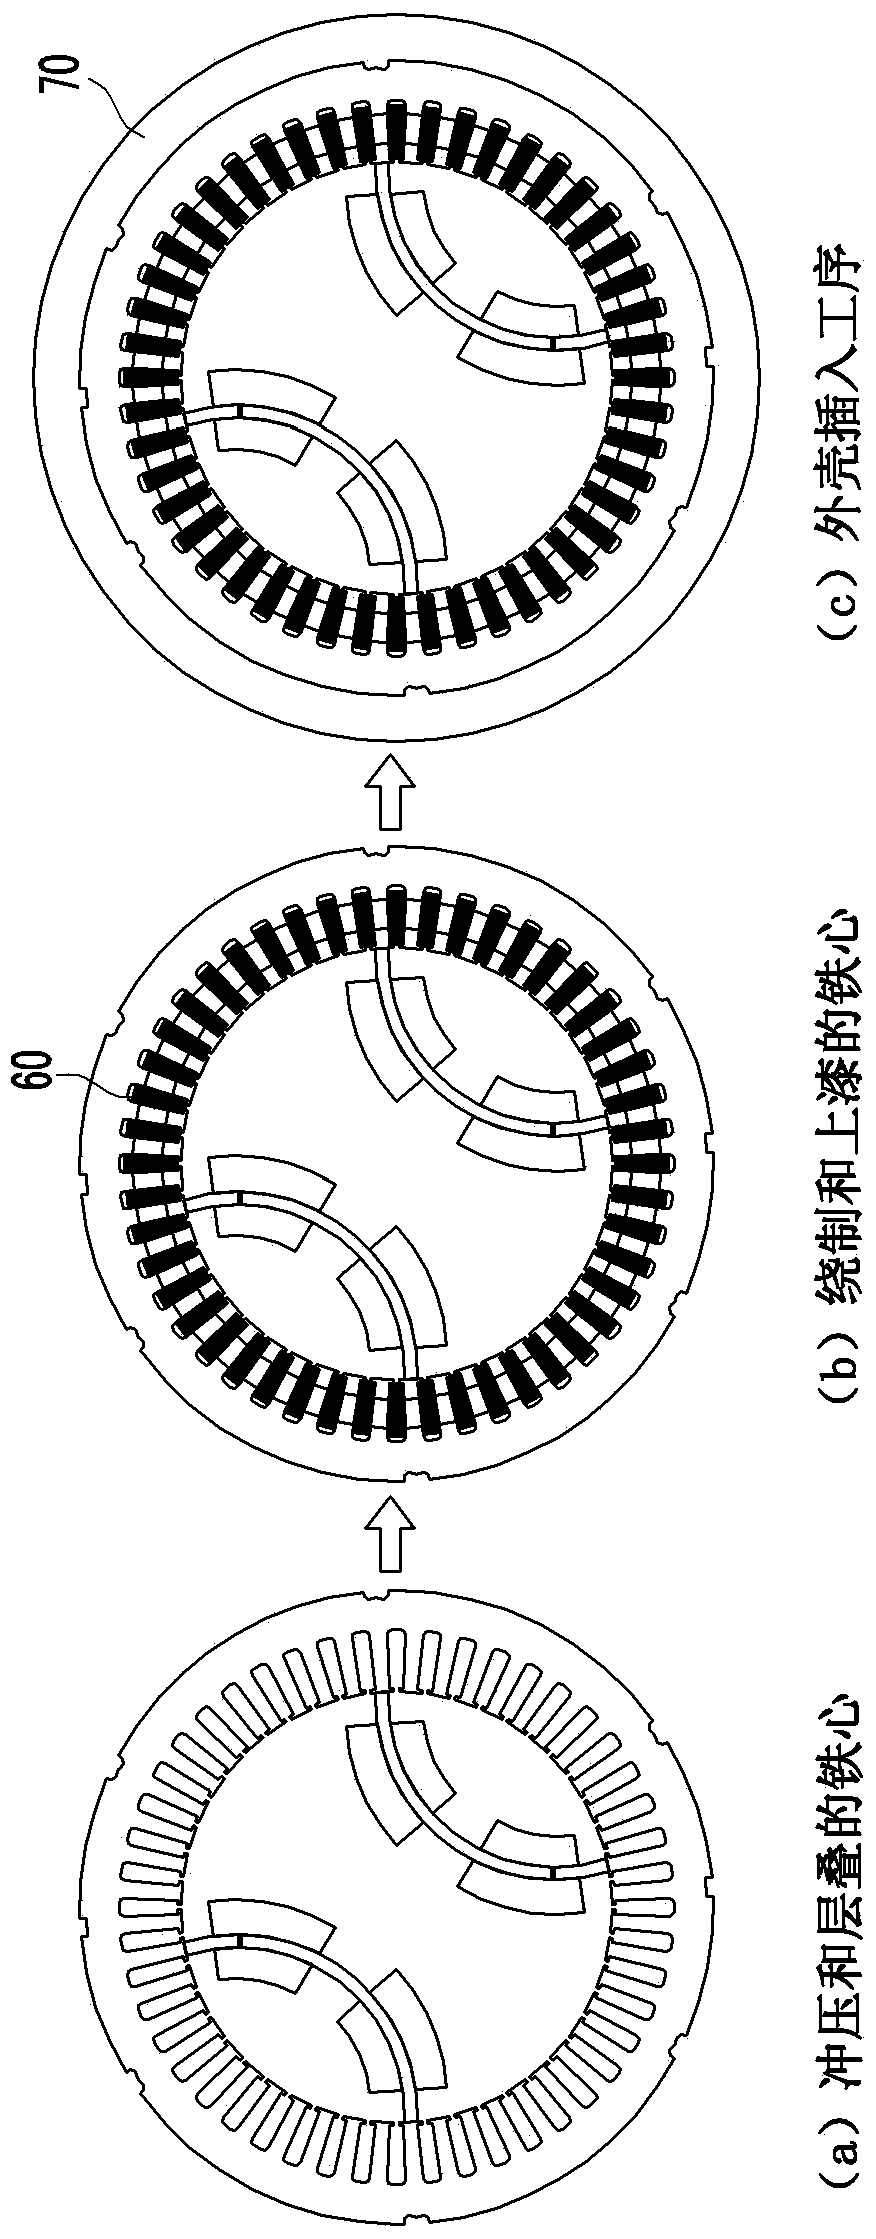 Structure for measuring iron loss of motor stator core